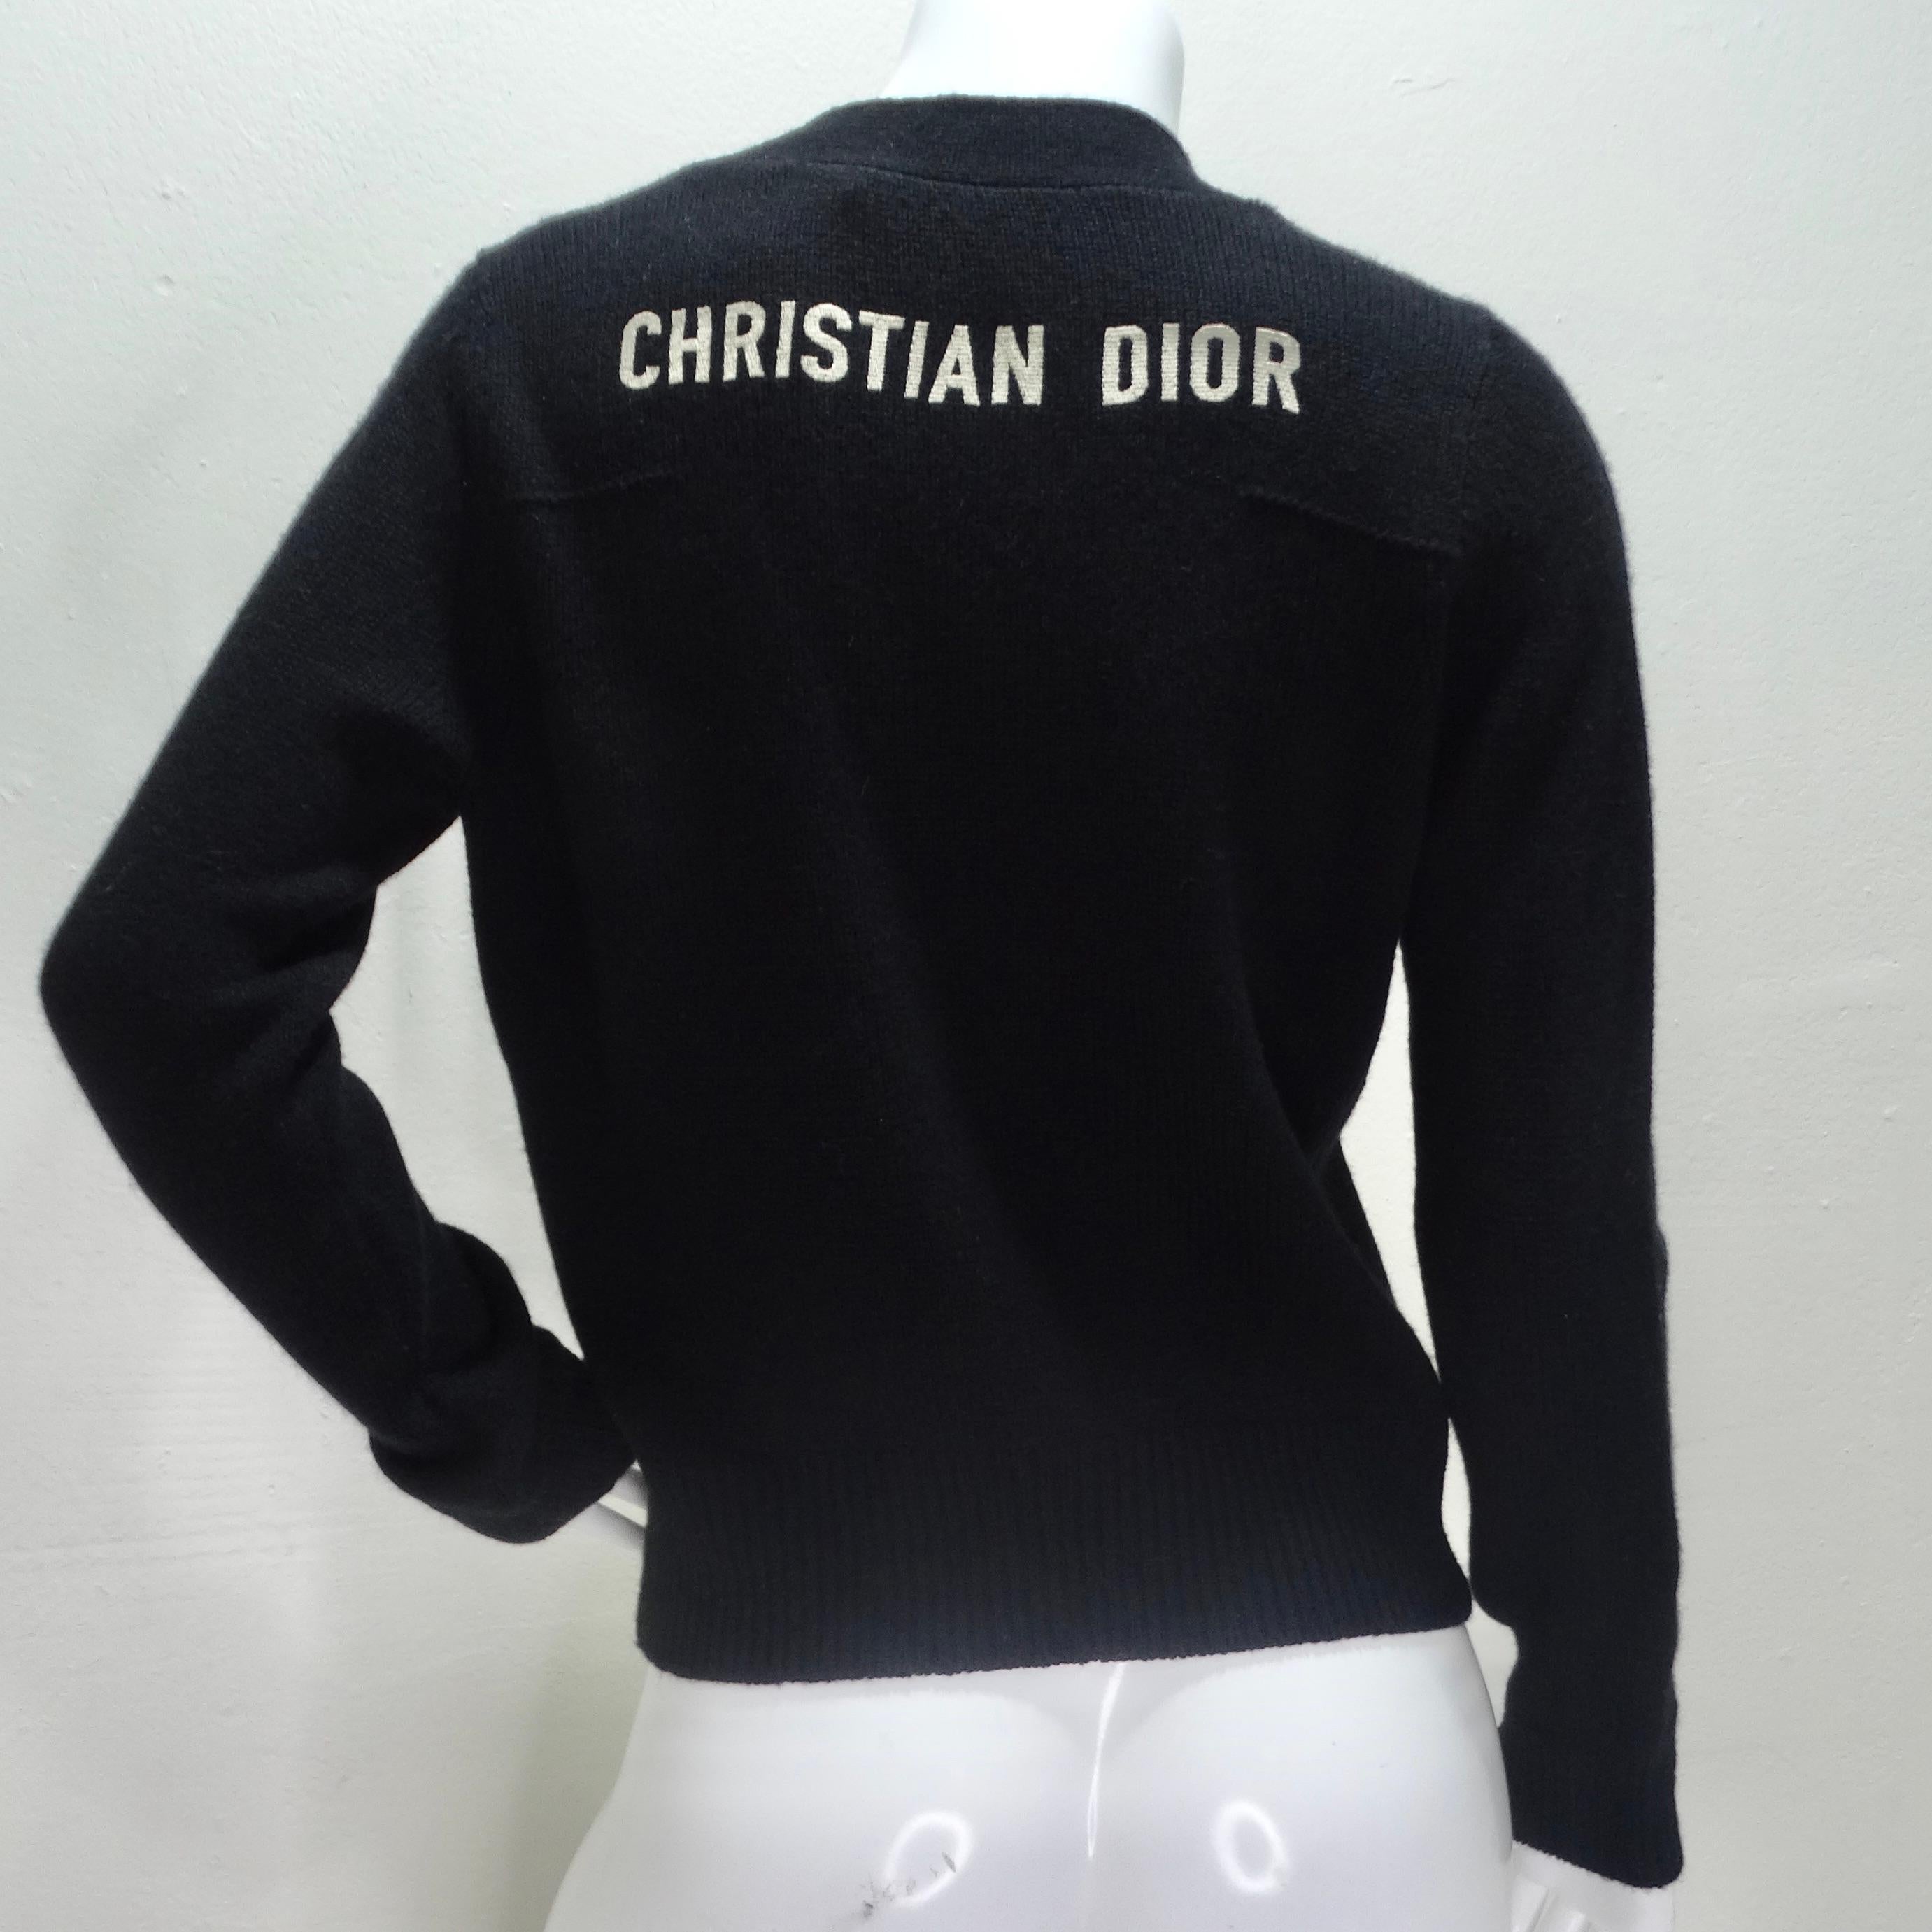 Introducing the Christian Dior Black Cashmere Knit Logo Cardigan – a timeless and versatile piece that exudes luxury and sophistication. Crafted from a sumptuous blend of cashmere and wool, this classic black knit cardigan offers unparalleled